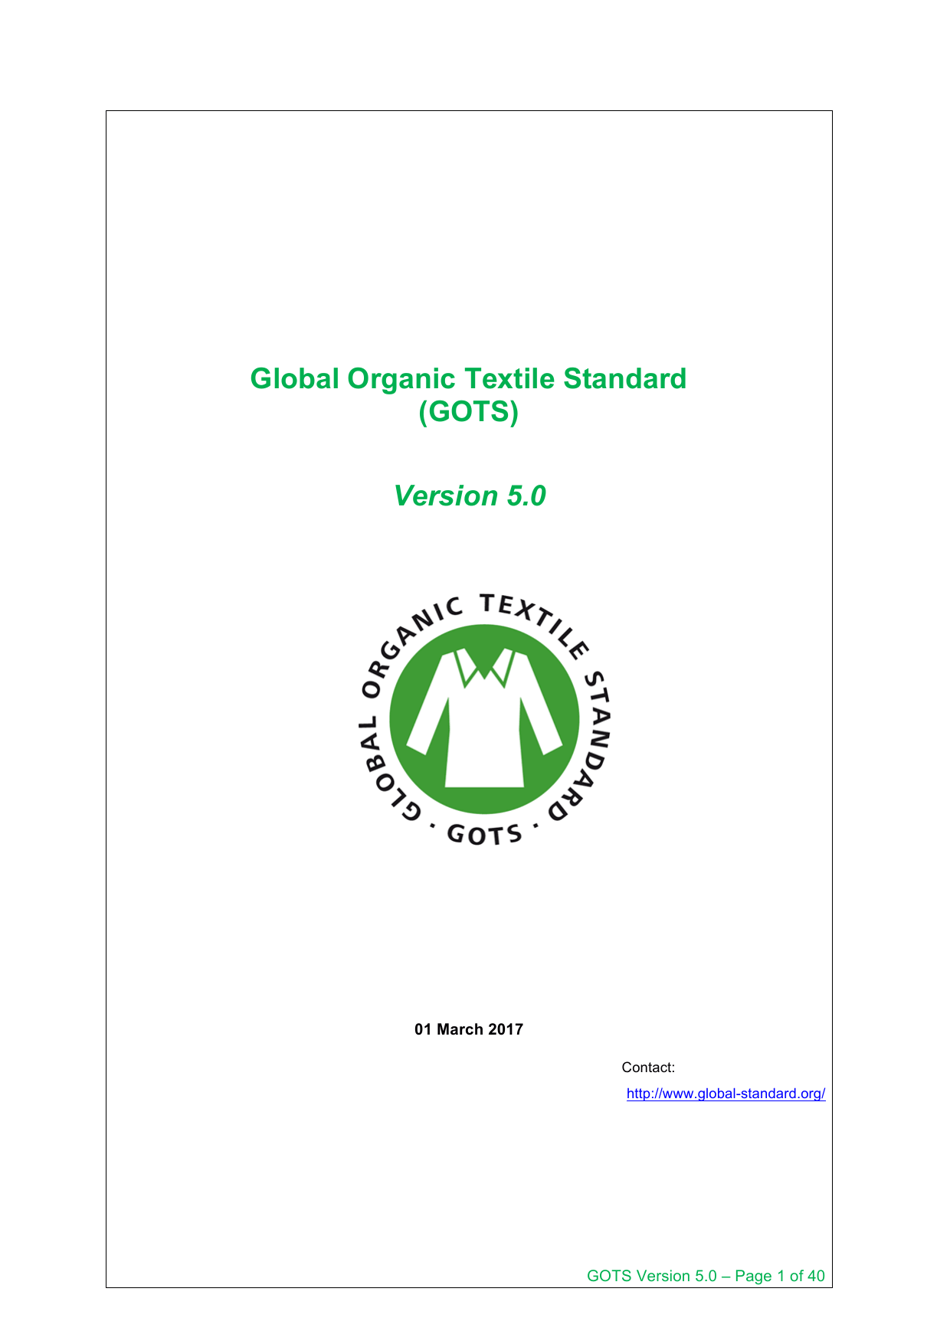 Global Organic Textile Standard - Version 5.0 Preview